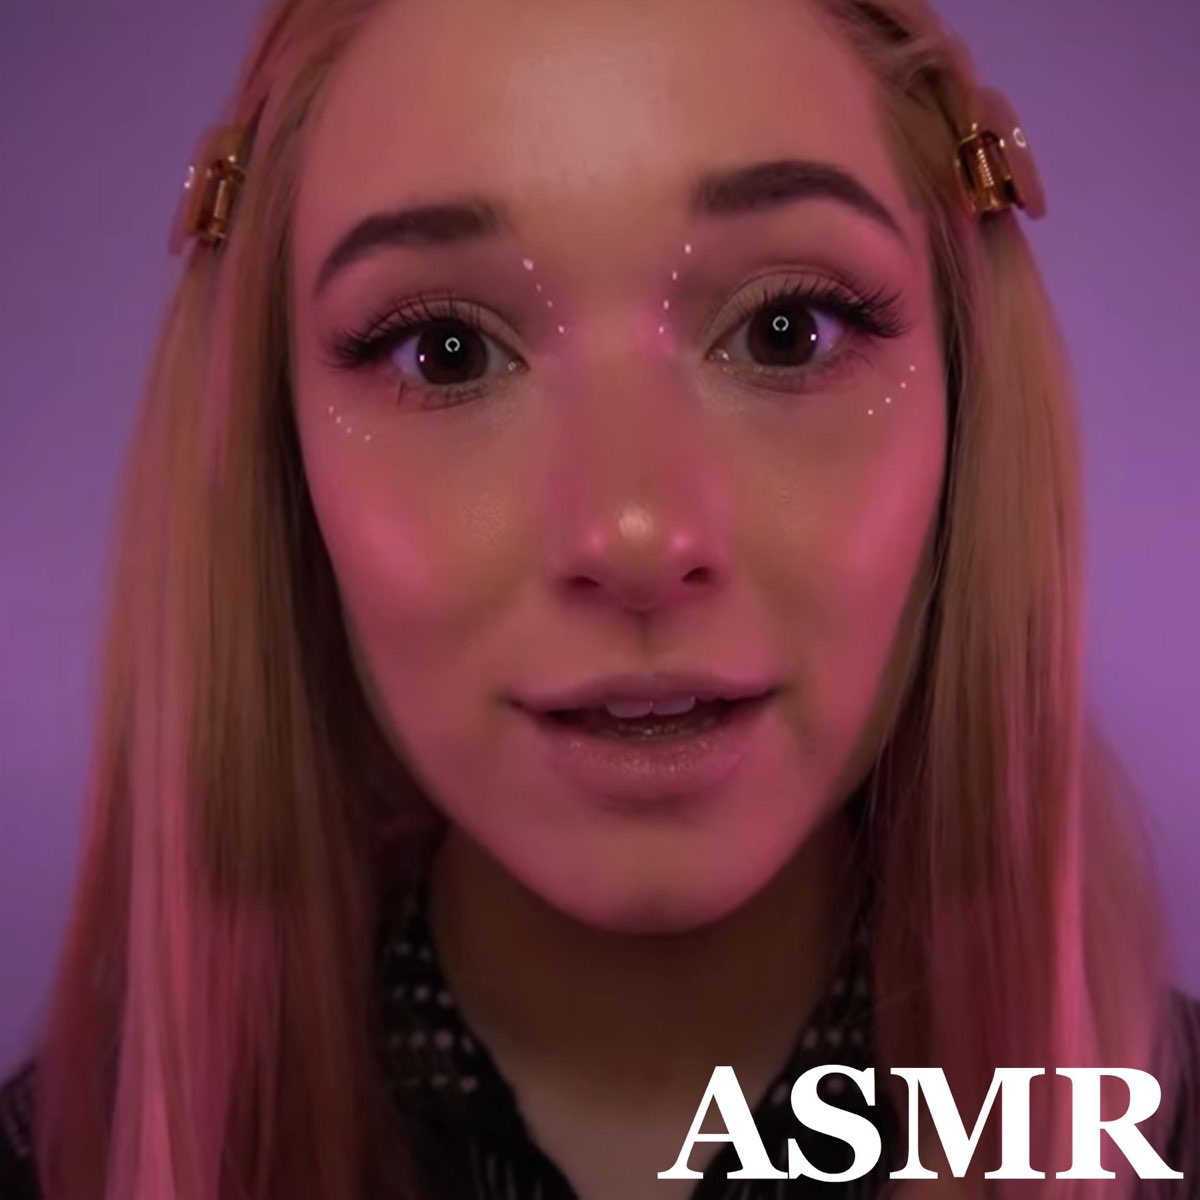 ‎twin Alien Abduction And Full Examination By Amy Kay Asmr On Apple Music